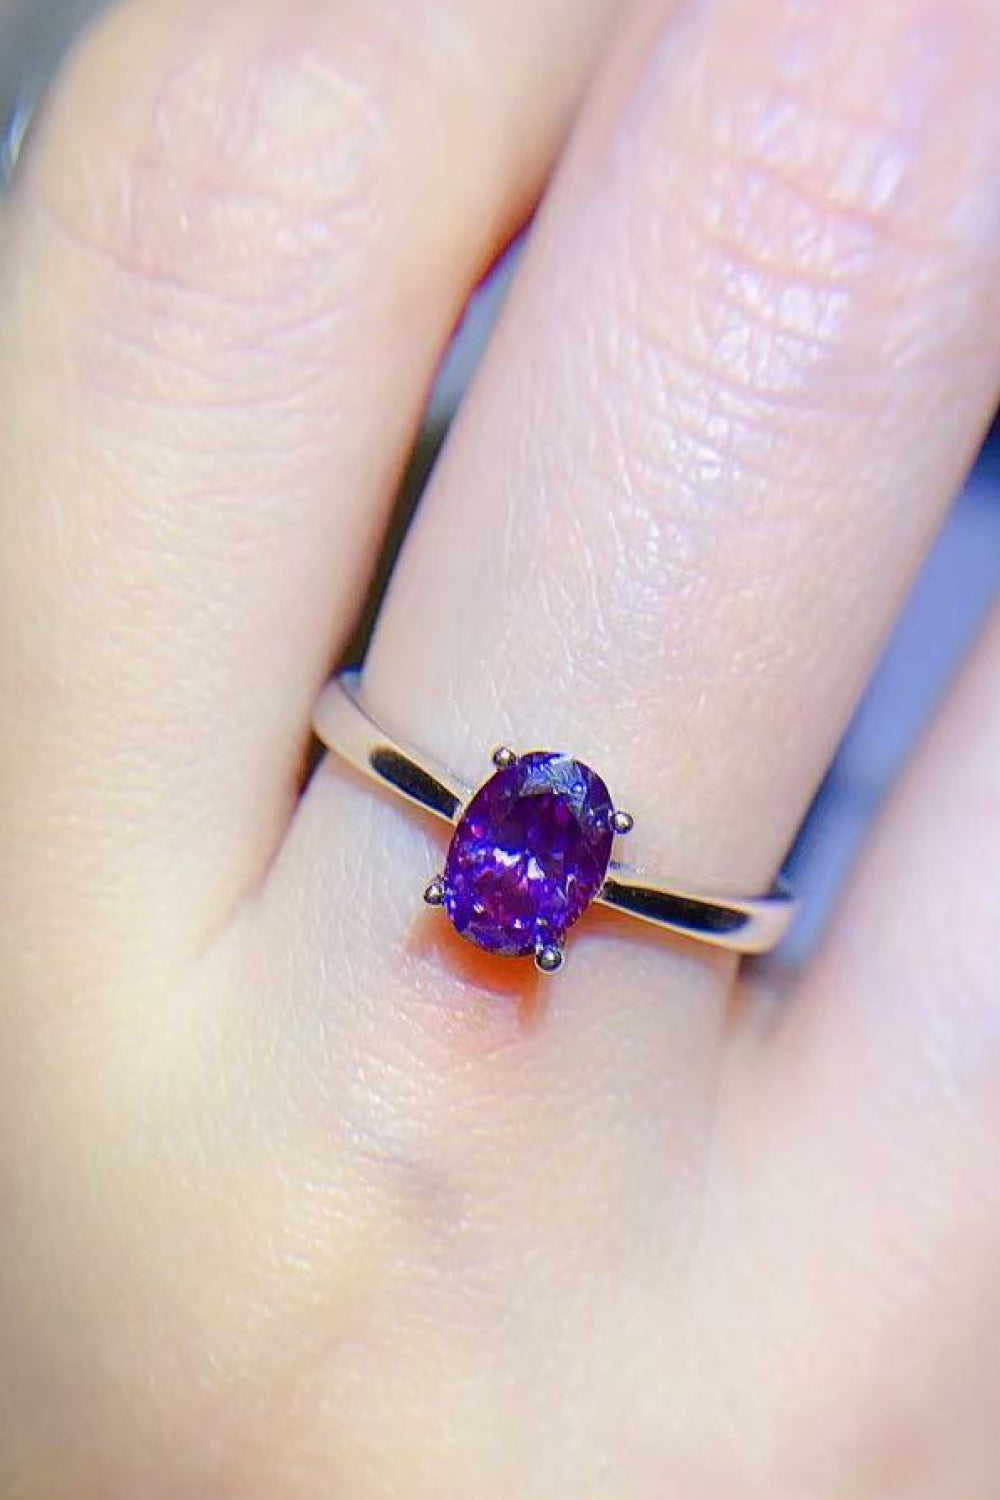 1 Carat Moissanite 4-Prong Solitaire Ring Purple